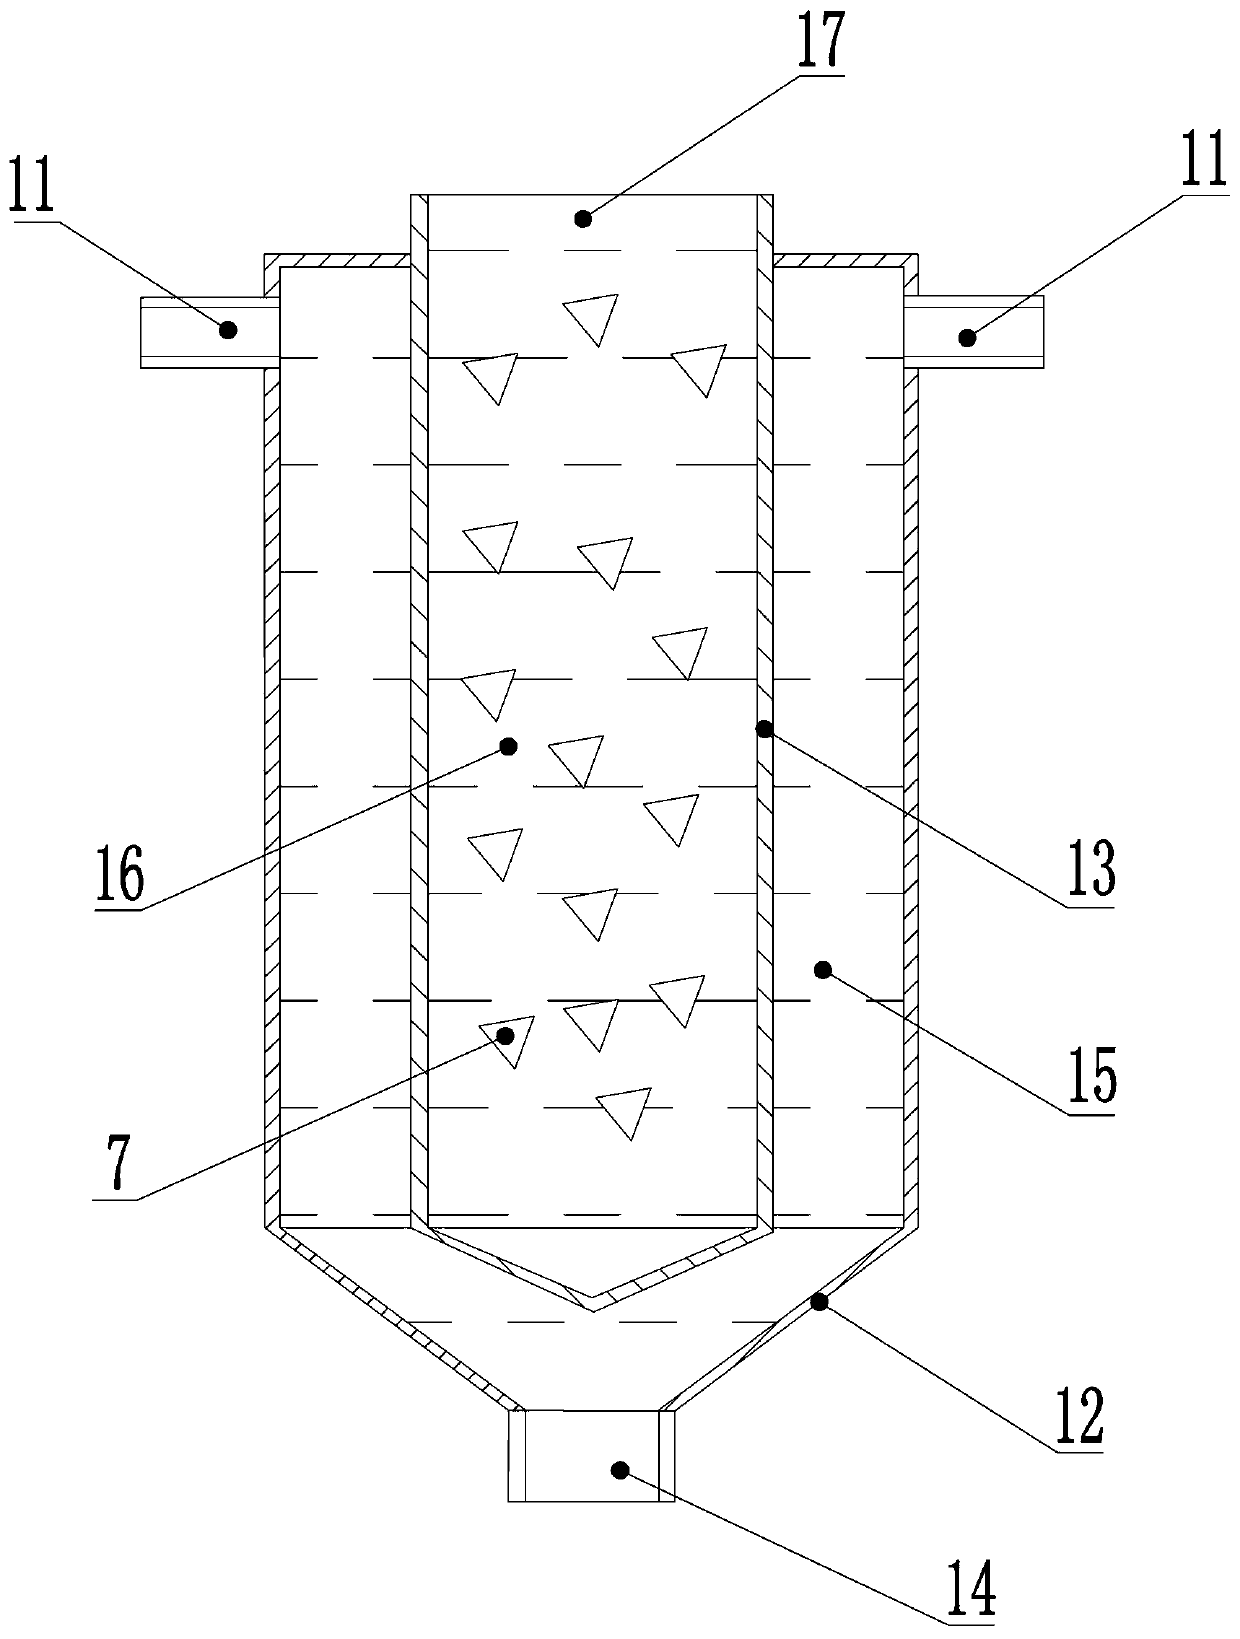 A metal-coated composite powder electroplating process